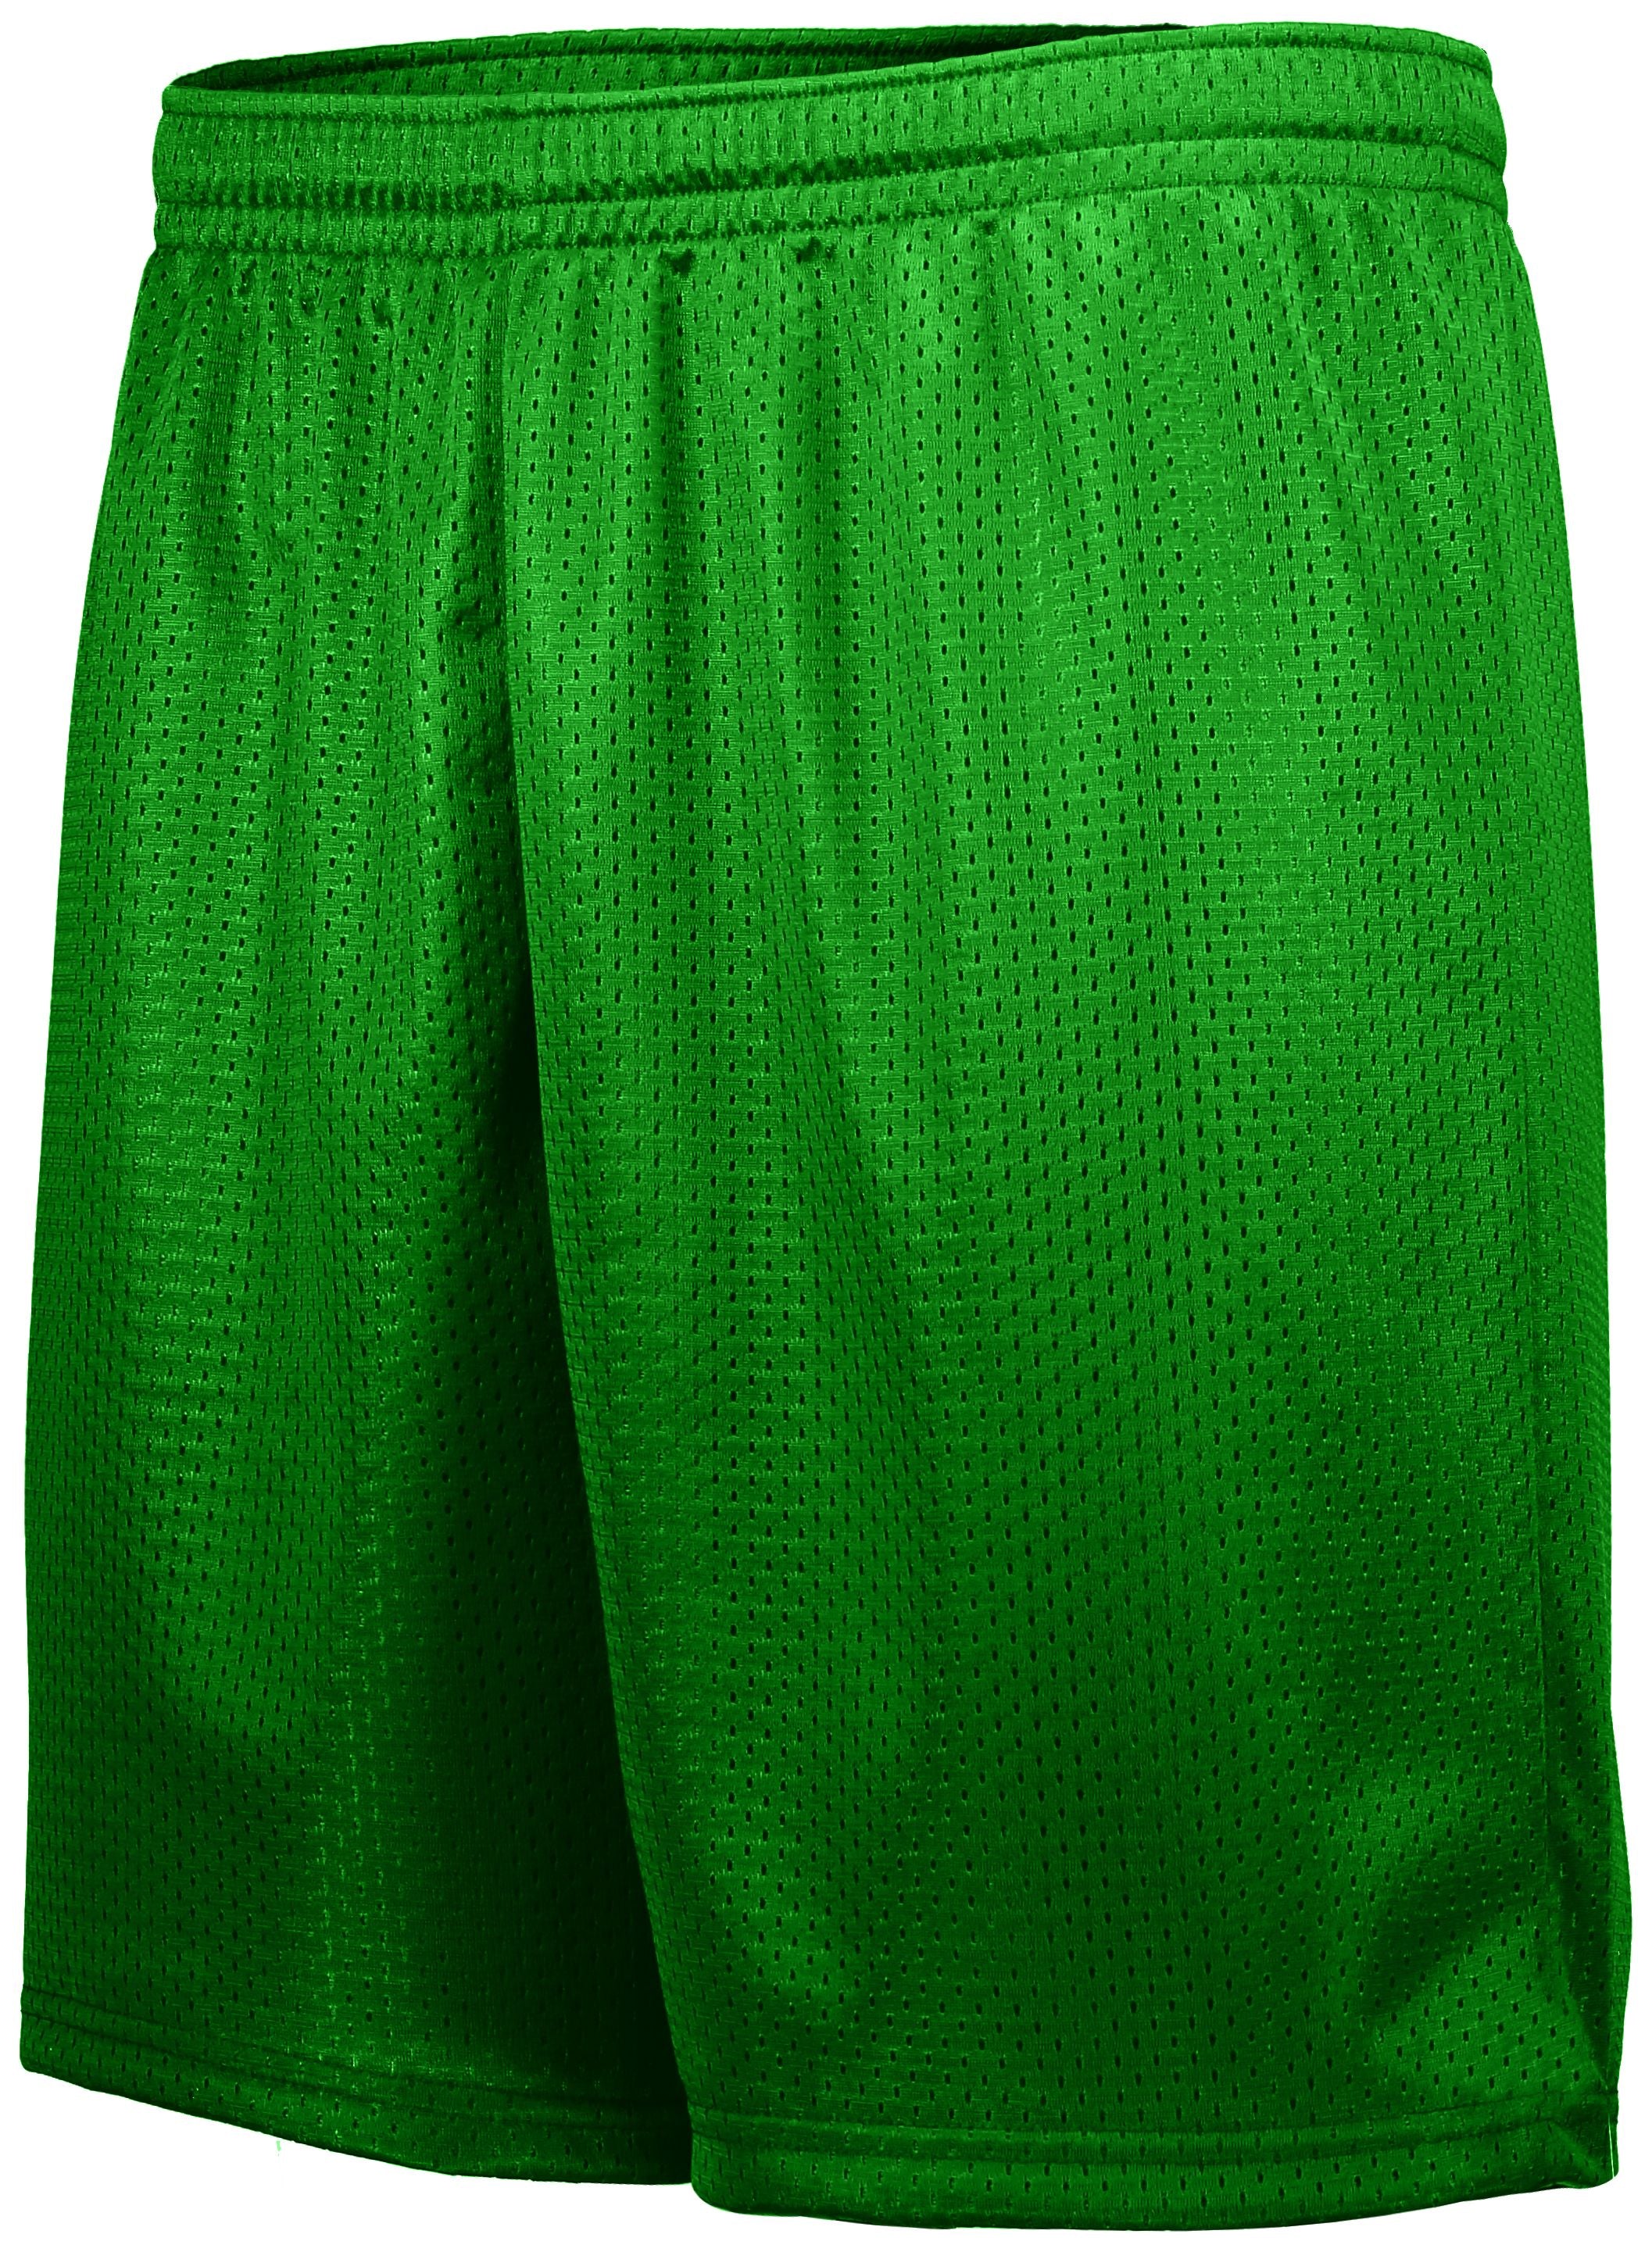 Augusta Sportswear Tricot Mesh Shorts in Kelly  -Part of the Adult, Adult-Shorts, Augusta-Products product lines at KanaleyCreations.com